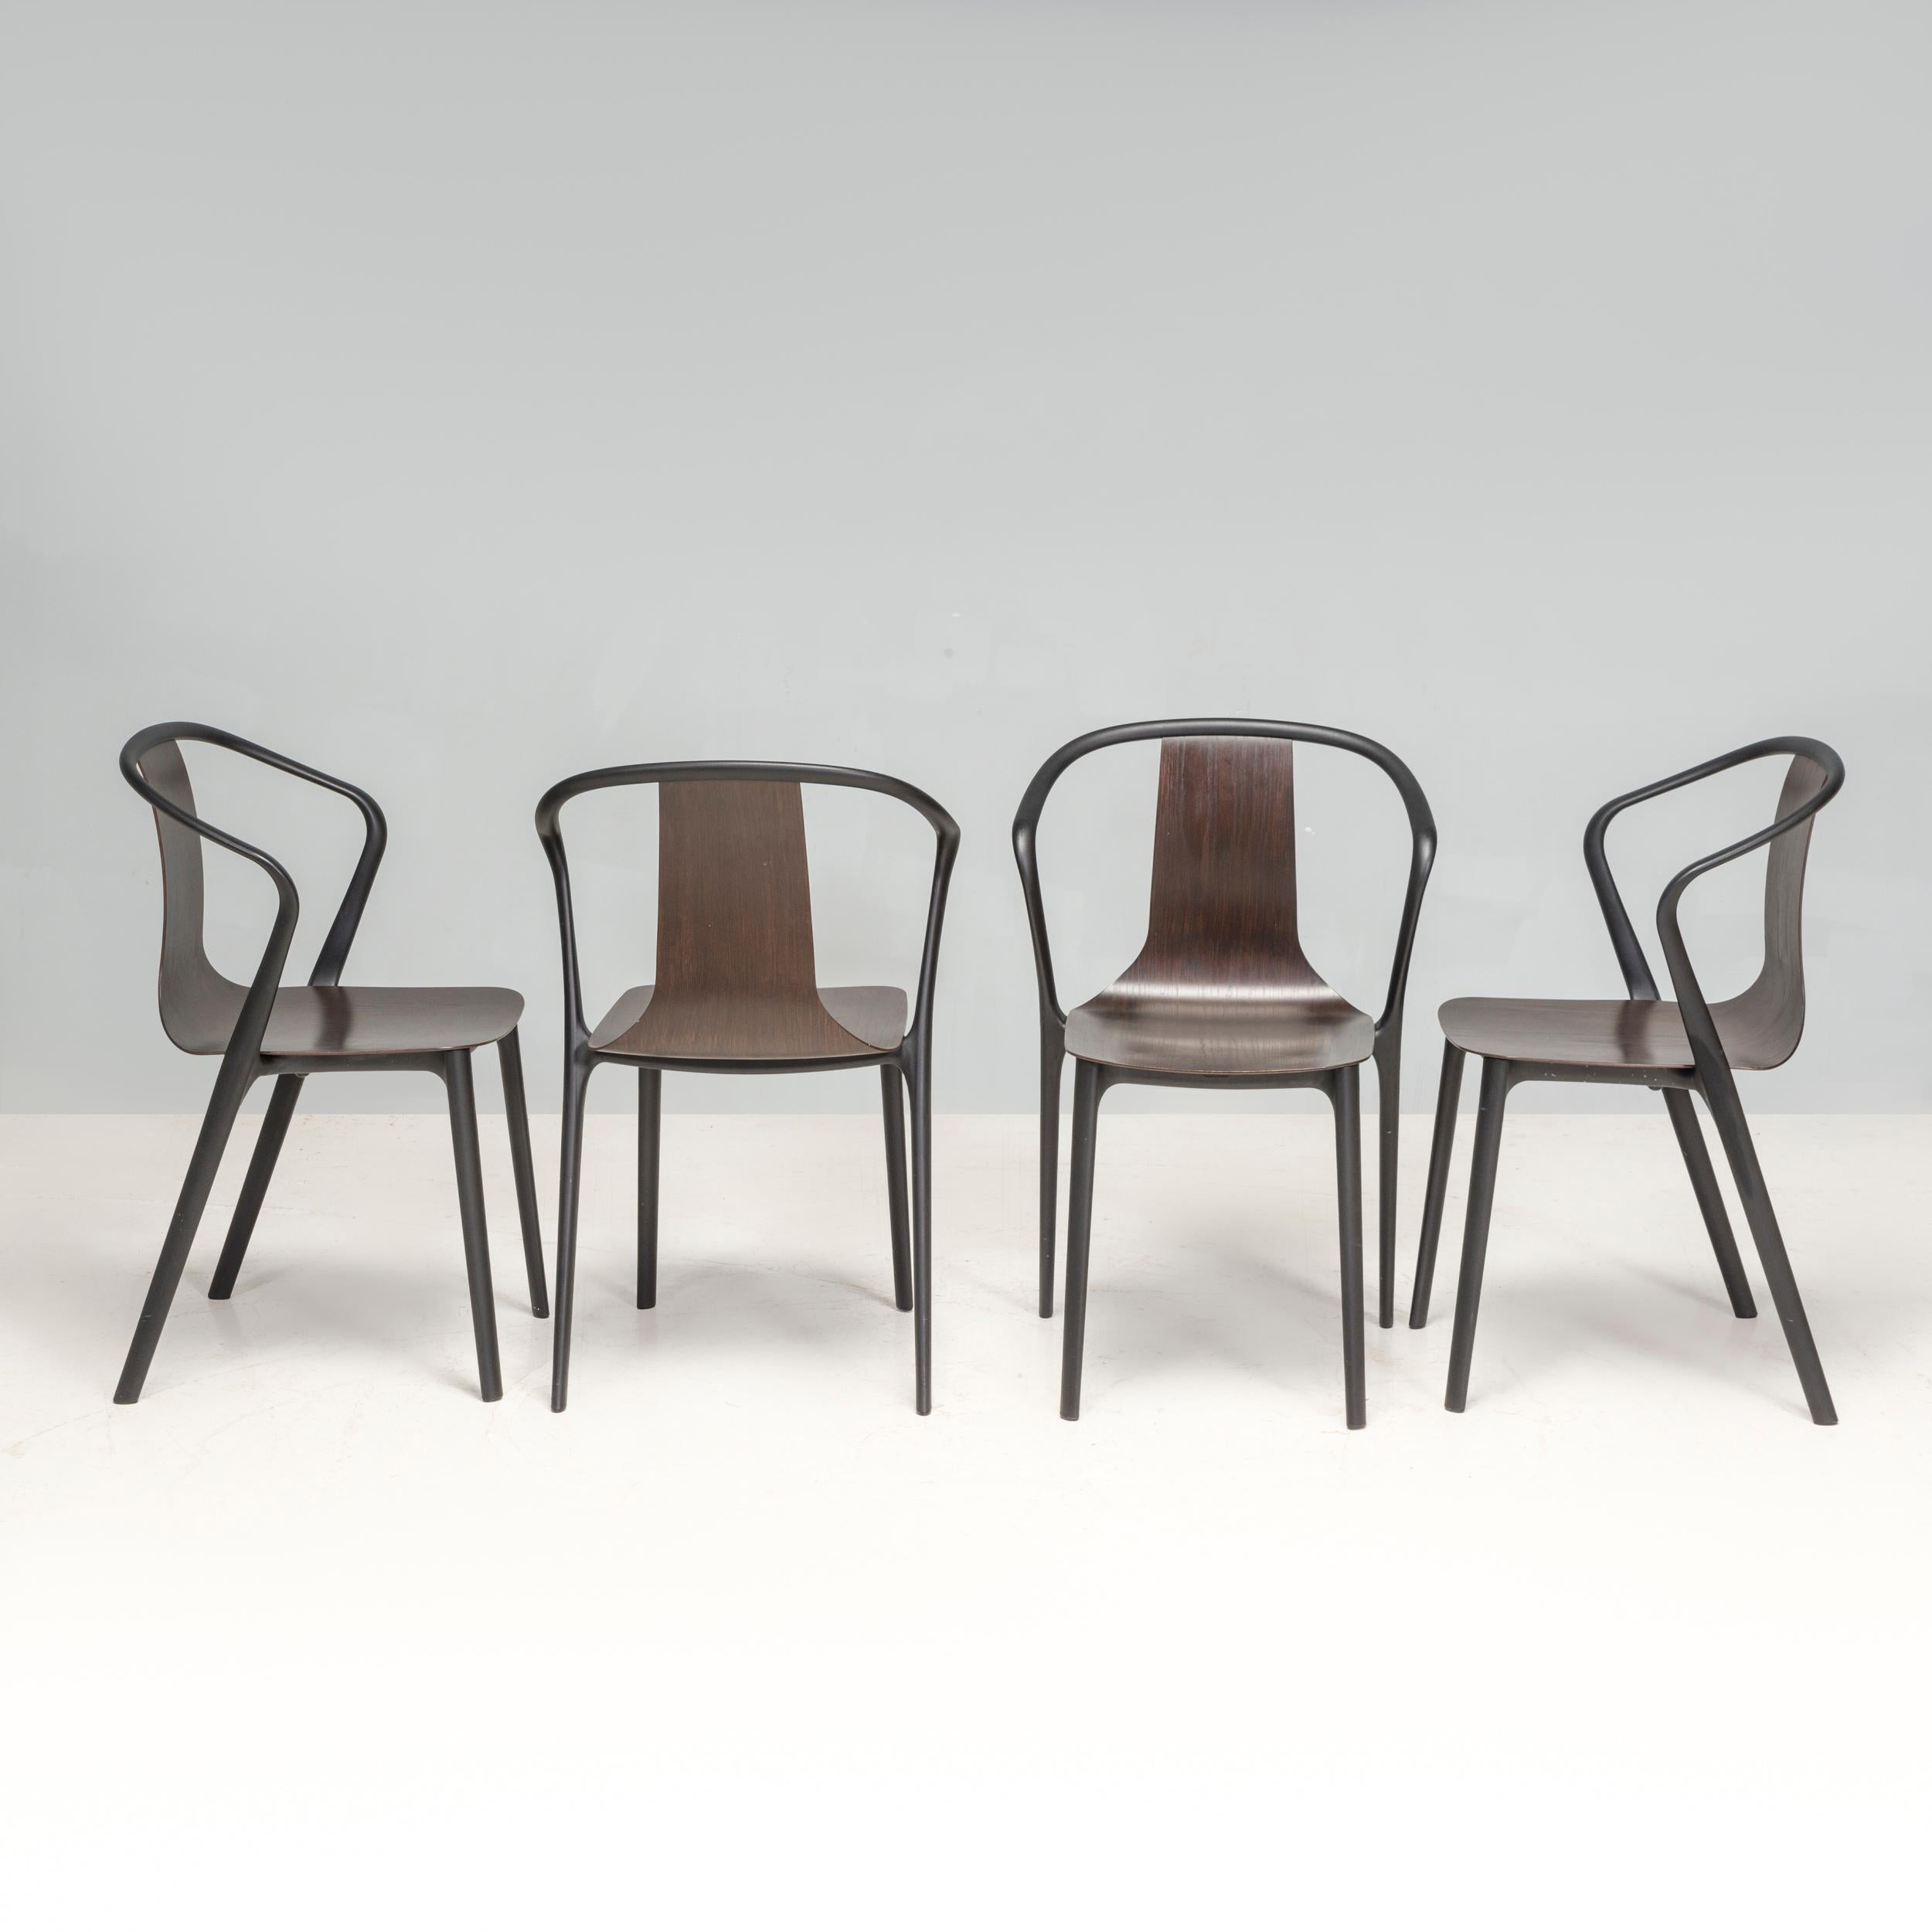 Contemporary Ronan & Erwan Bouroullec for Vitra Dark Oak Belleville Dining Chairs, Set of 4